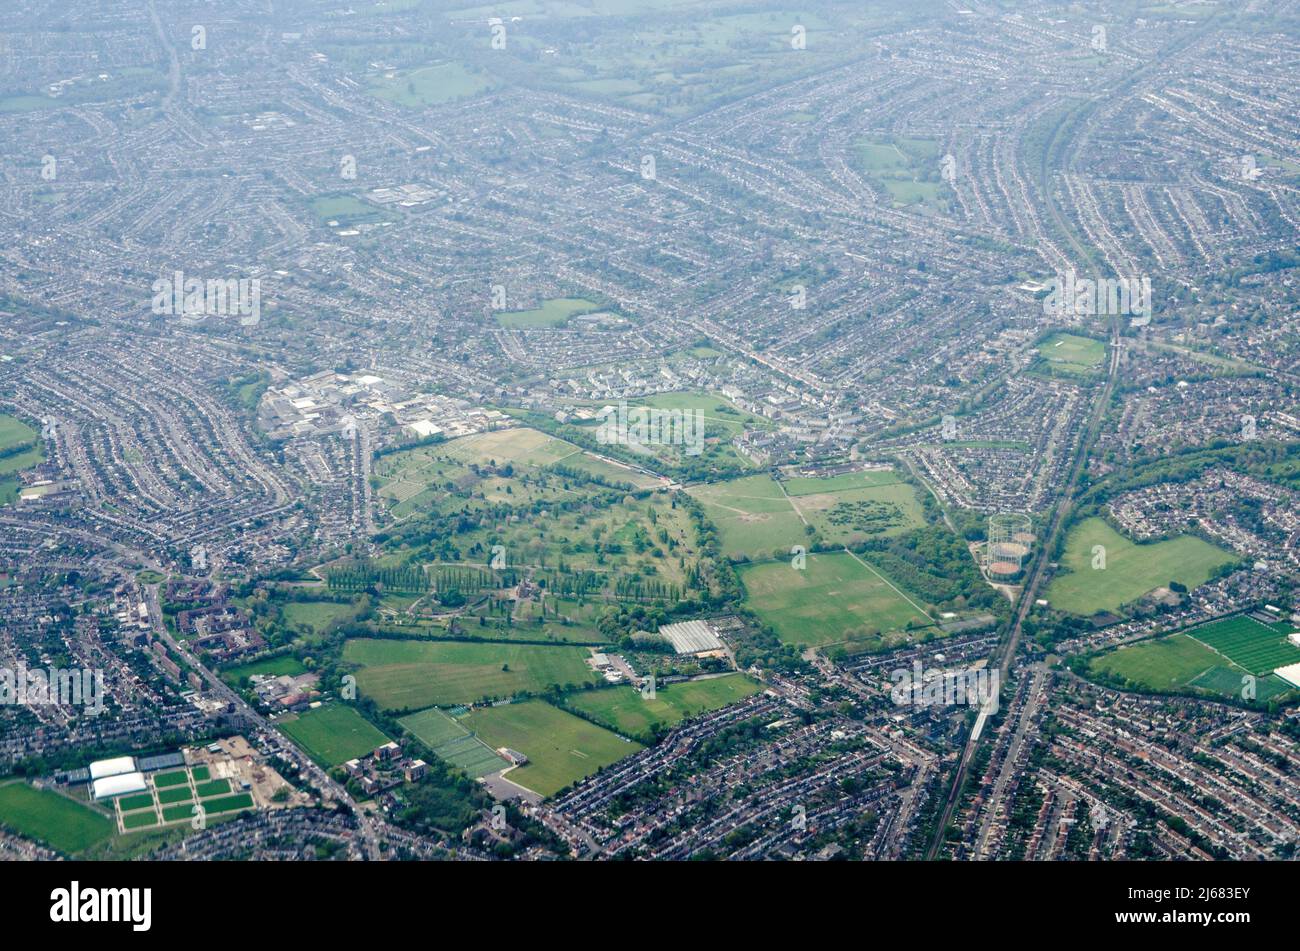 Aerial view looking south from New Malden towards Motspur Park, Tolworth, Morden and Cheam in the London Boroughs of Kingston-Upon-Thames and Sutton o Stock Photo